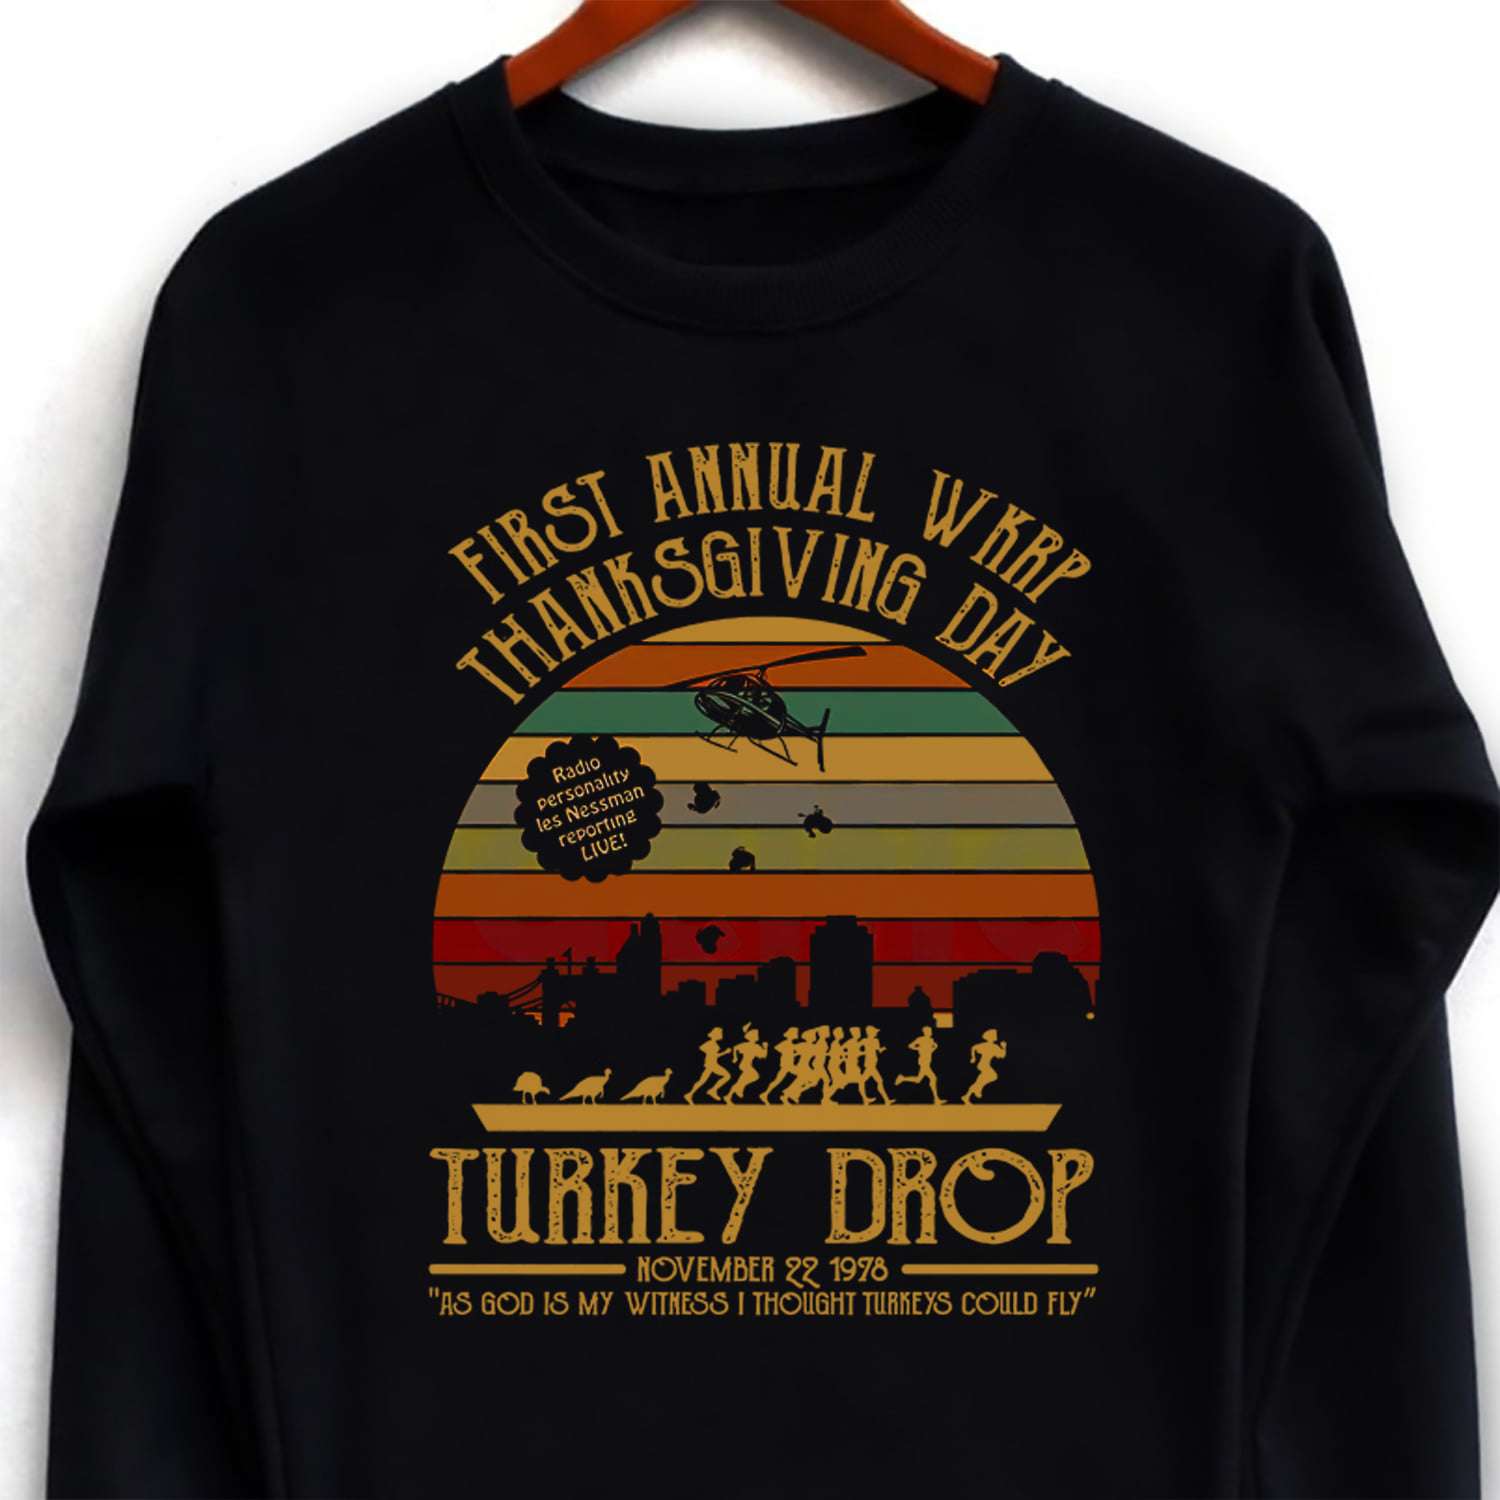 First annual wkrp thanksgiving day - Turkey drop, Helicopter drop Turkey, Turkey for Thanksgiving day